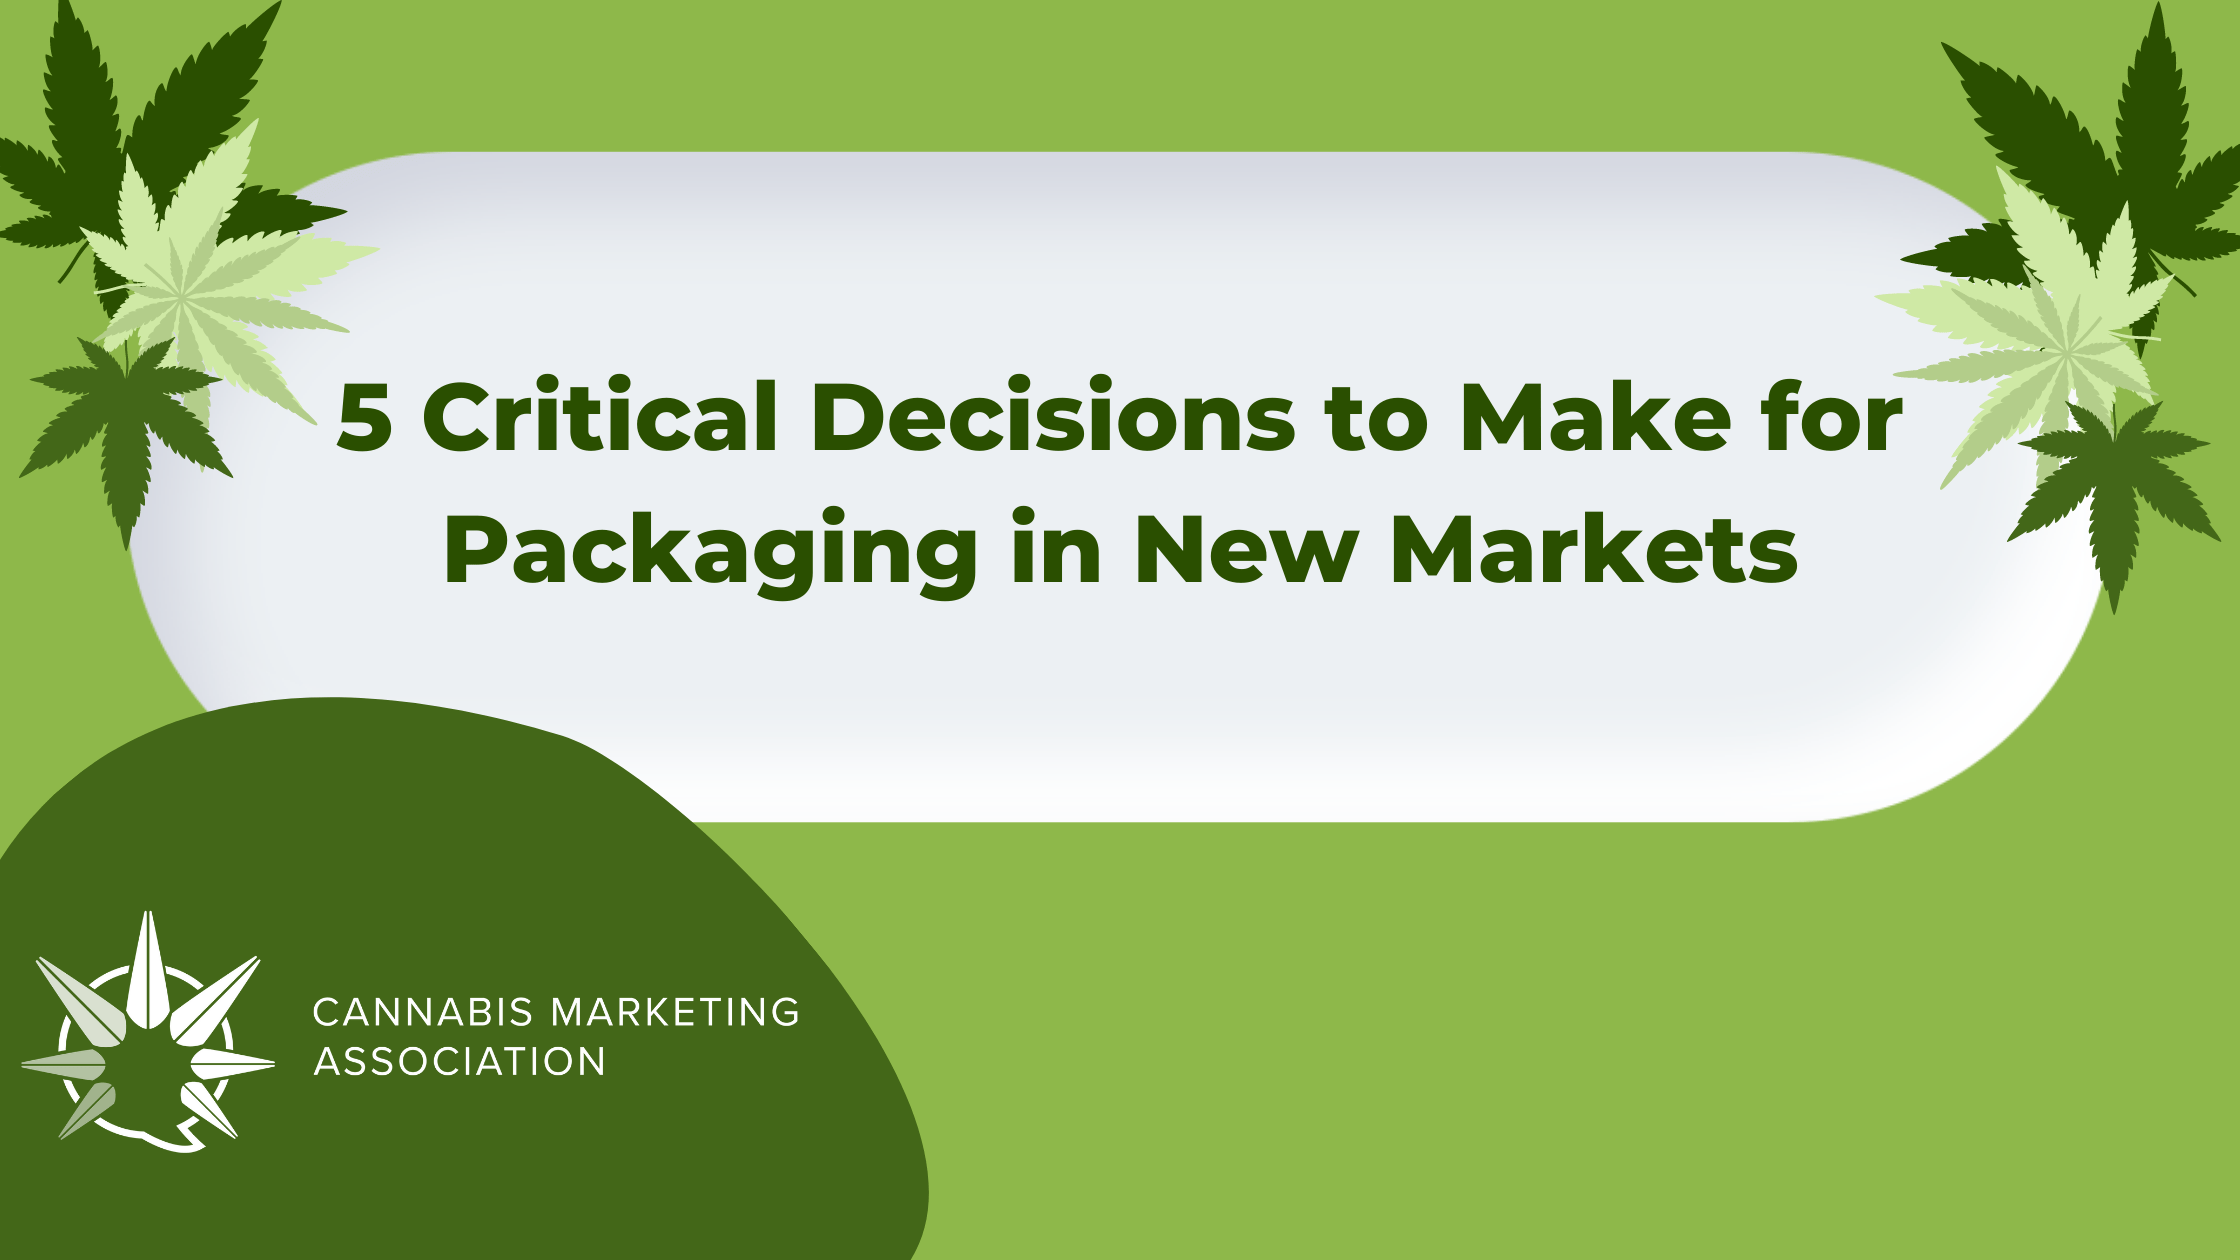 5 Critical Decisions to Make for Packaging in New Markets